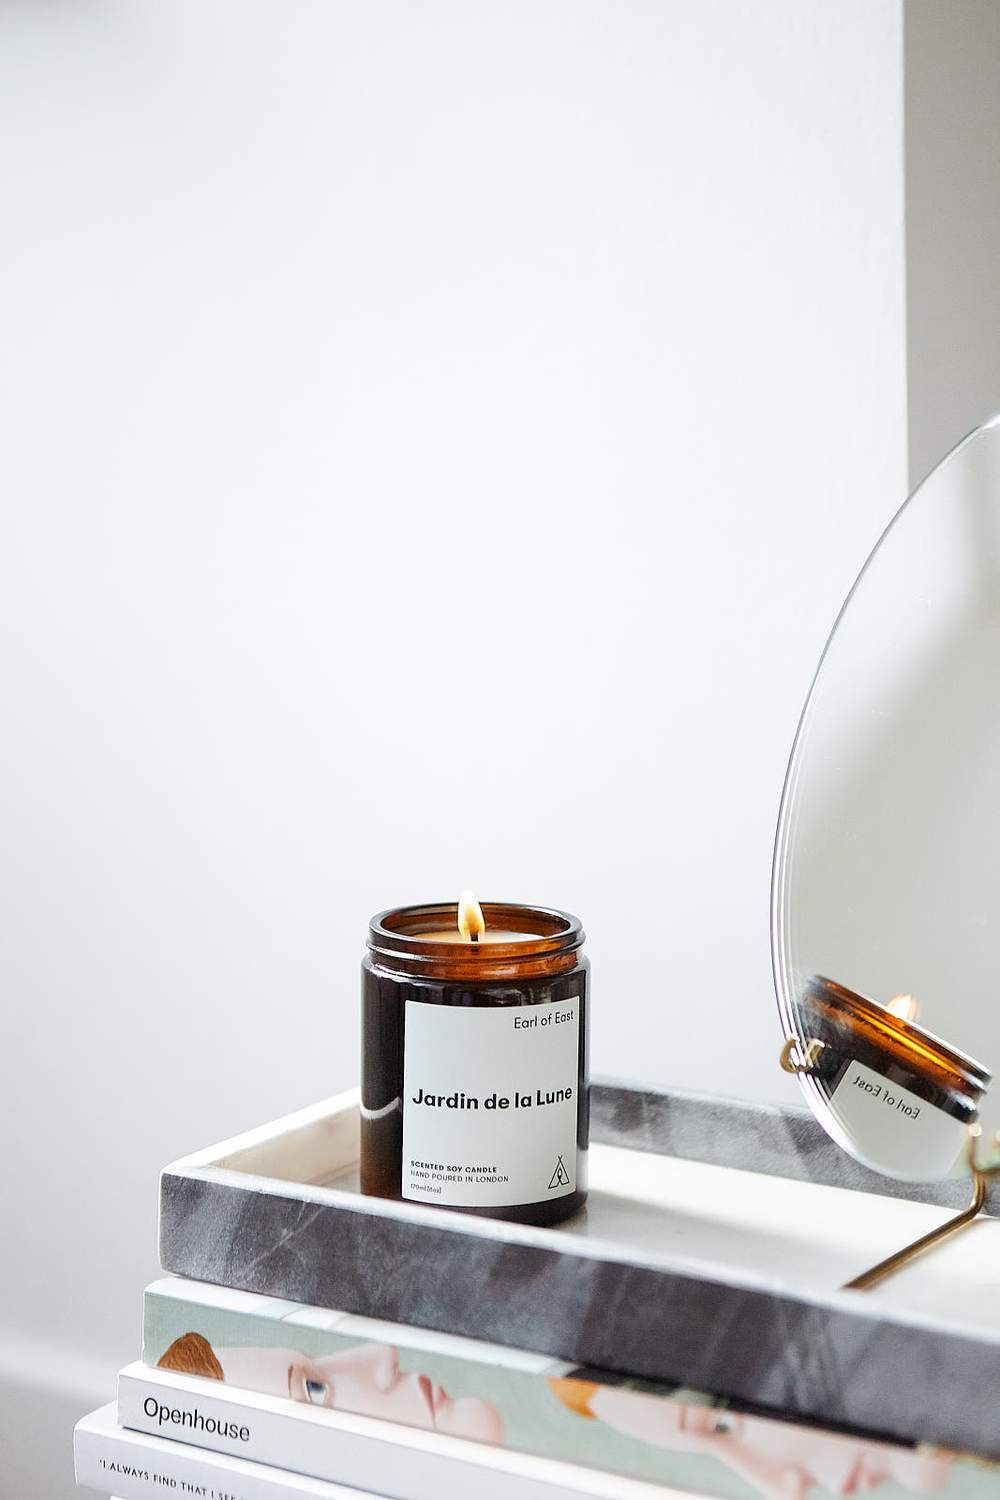 Elementary | 170ml | Soy Wax Candle | by Earl of East - Lifestory - Earl of East